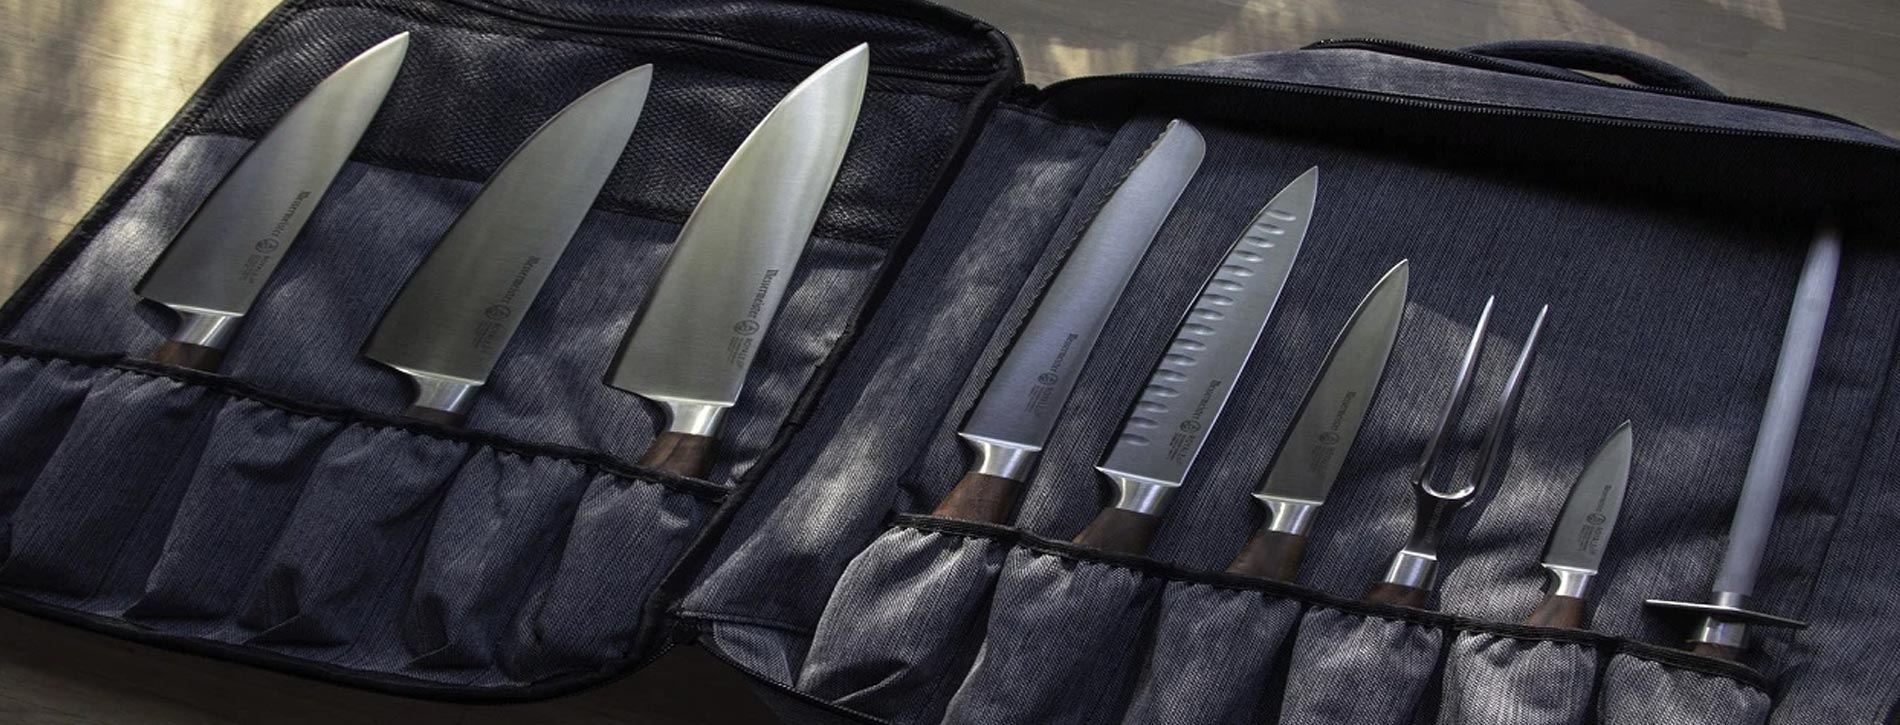 Our Complete Guide for Chef Knife Bags